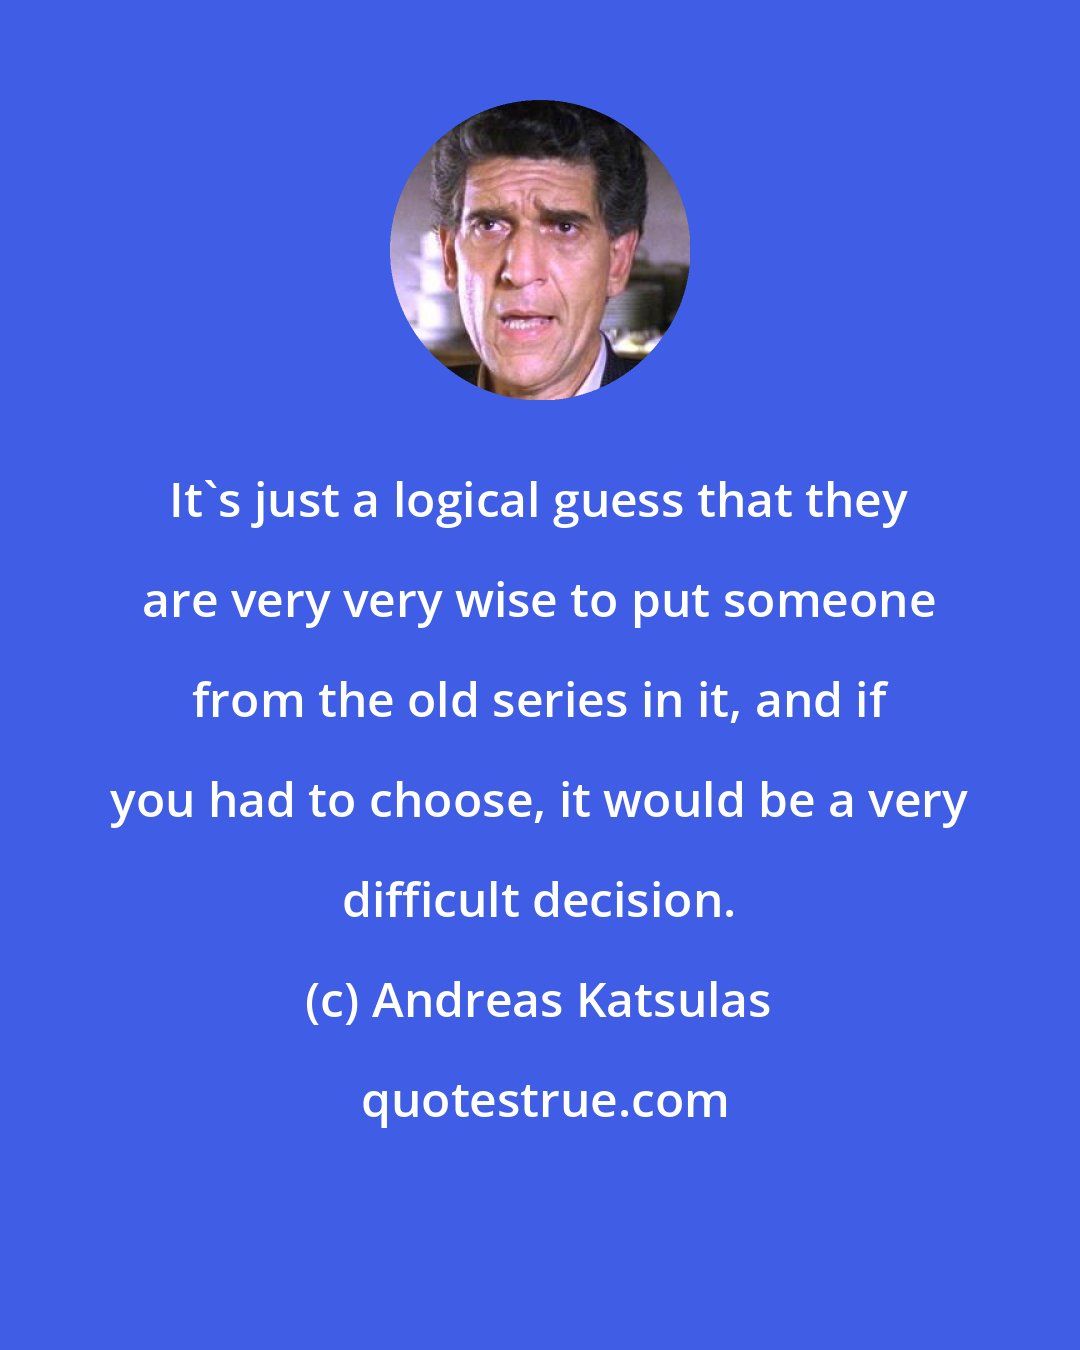 Andreas Katsulas: It's just a logical guess that they are very very wise to put someone from the old series in it, and if you had to choose, it would be a very difficult decision.